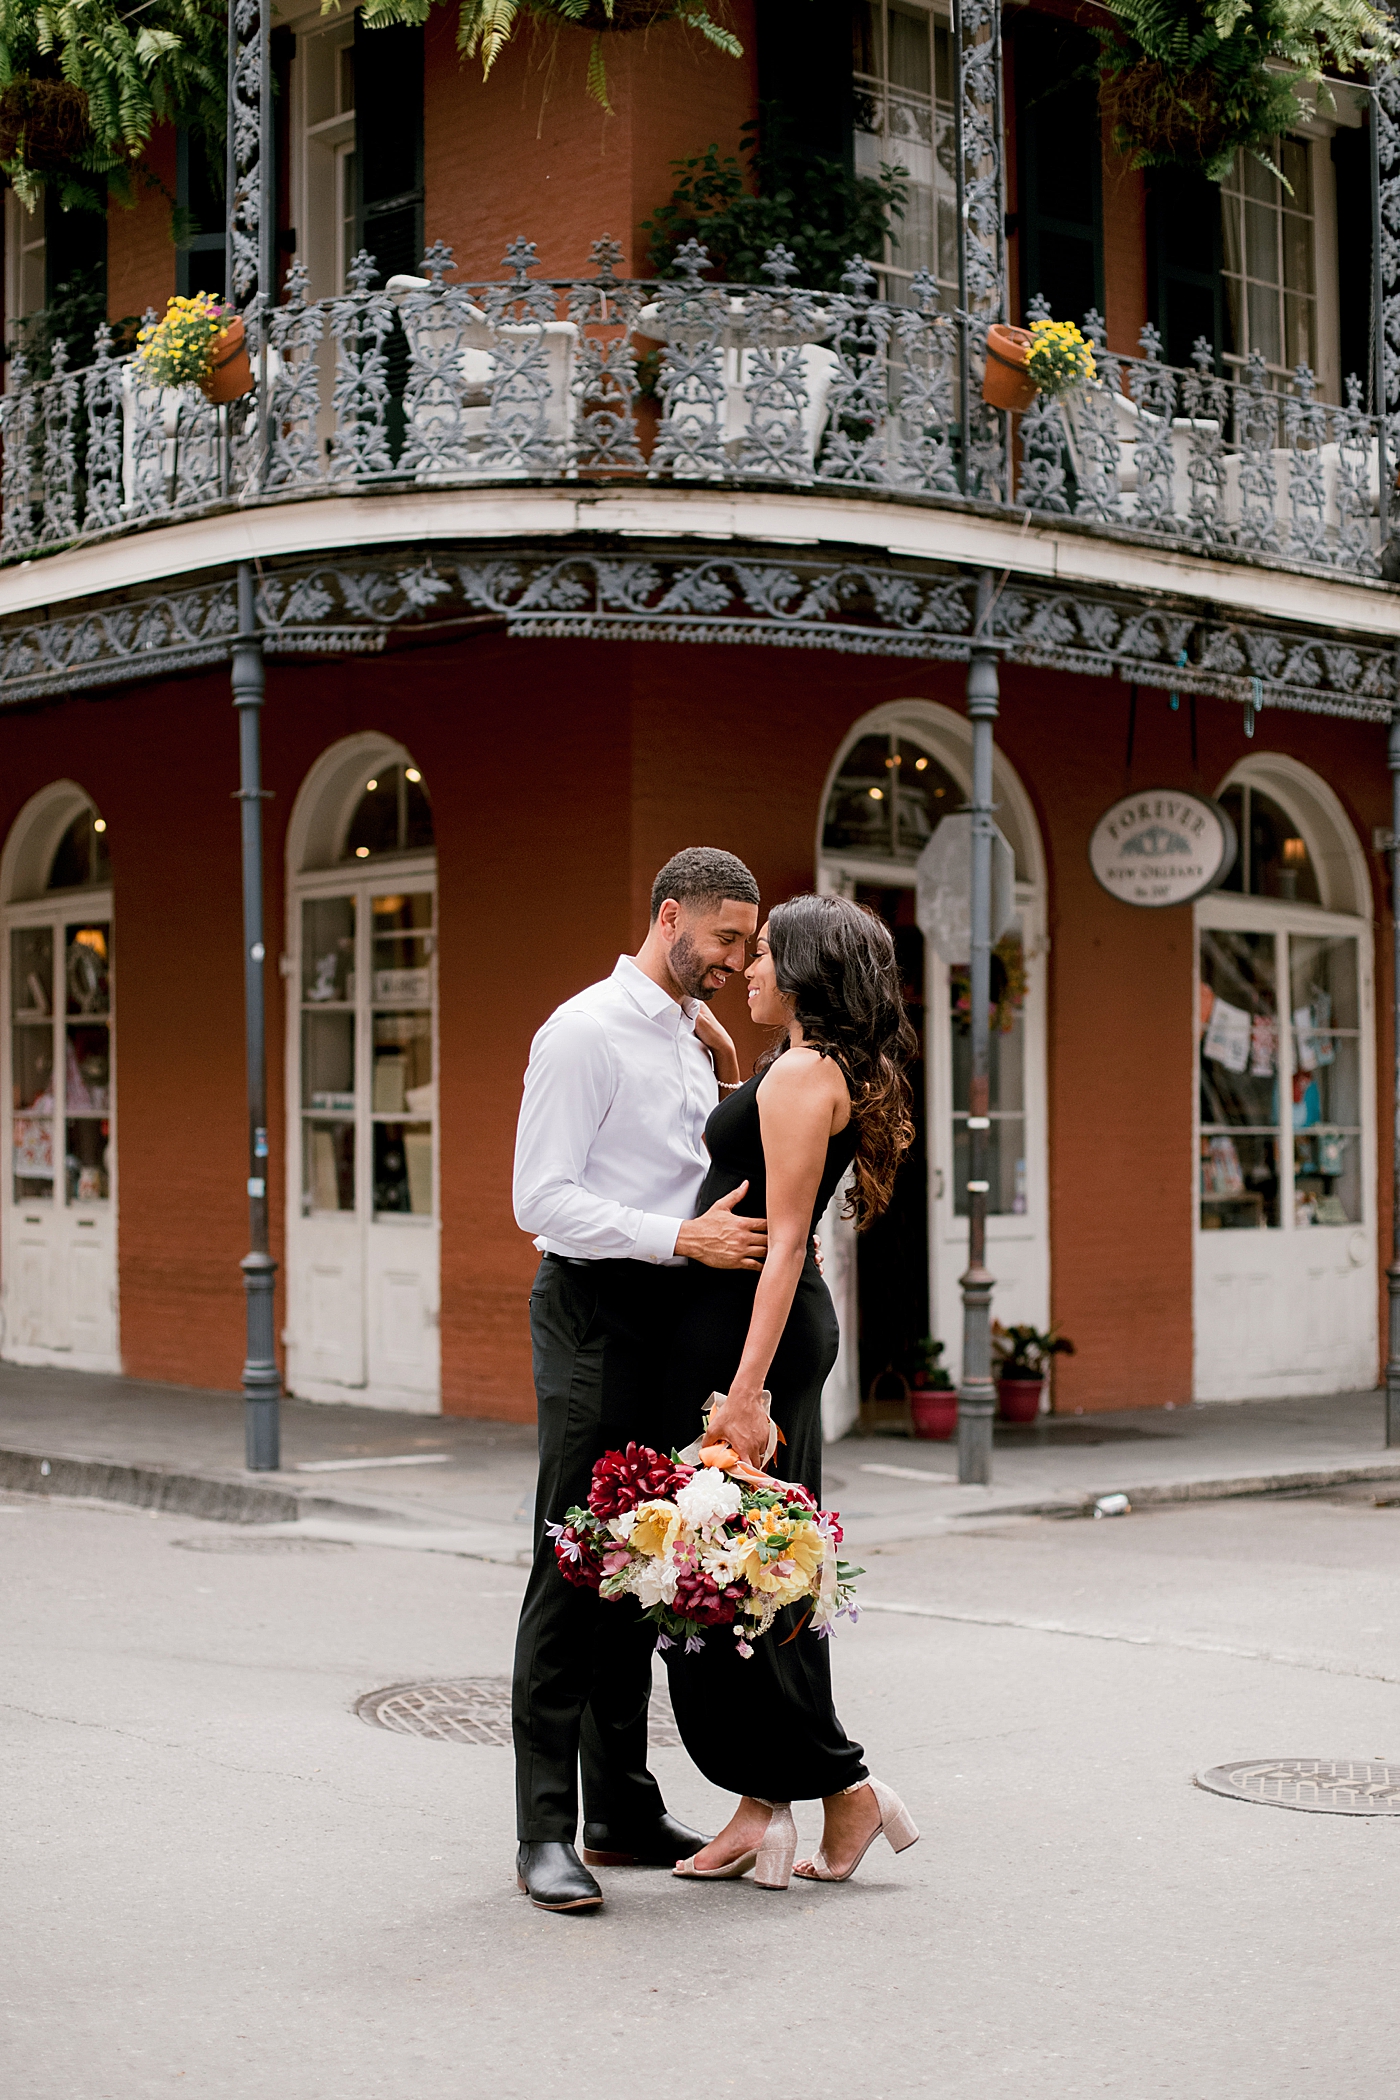 Couple snuggling together during their New Orleans Engagement Session | Photo by Hope Helmuth Photography